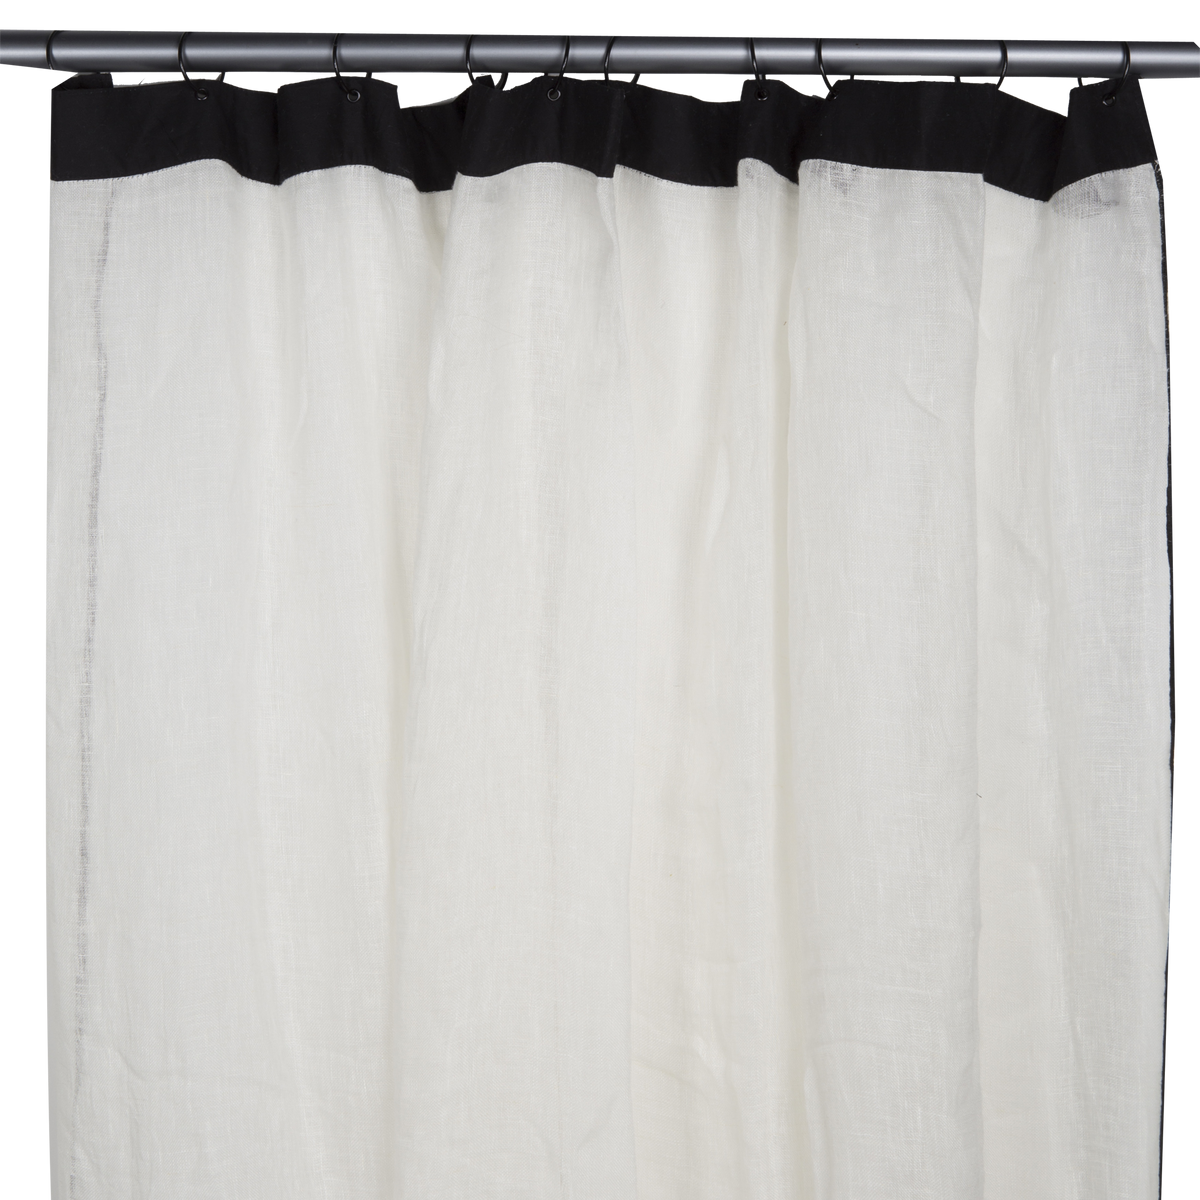 Add a light and airy feel to your room with this semi-transparent linen voile curtain.